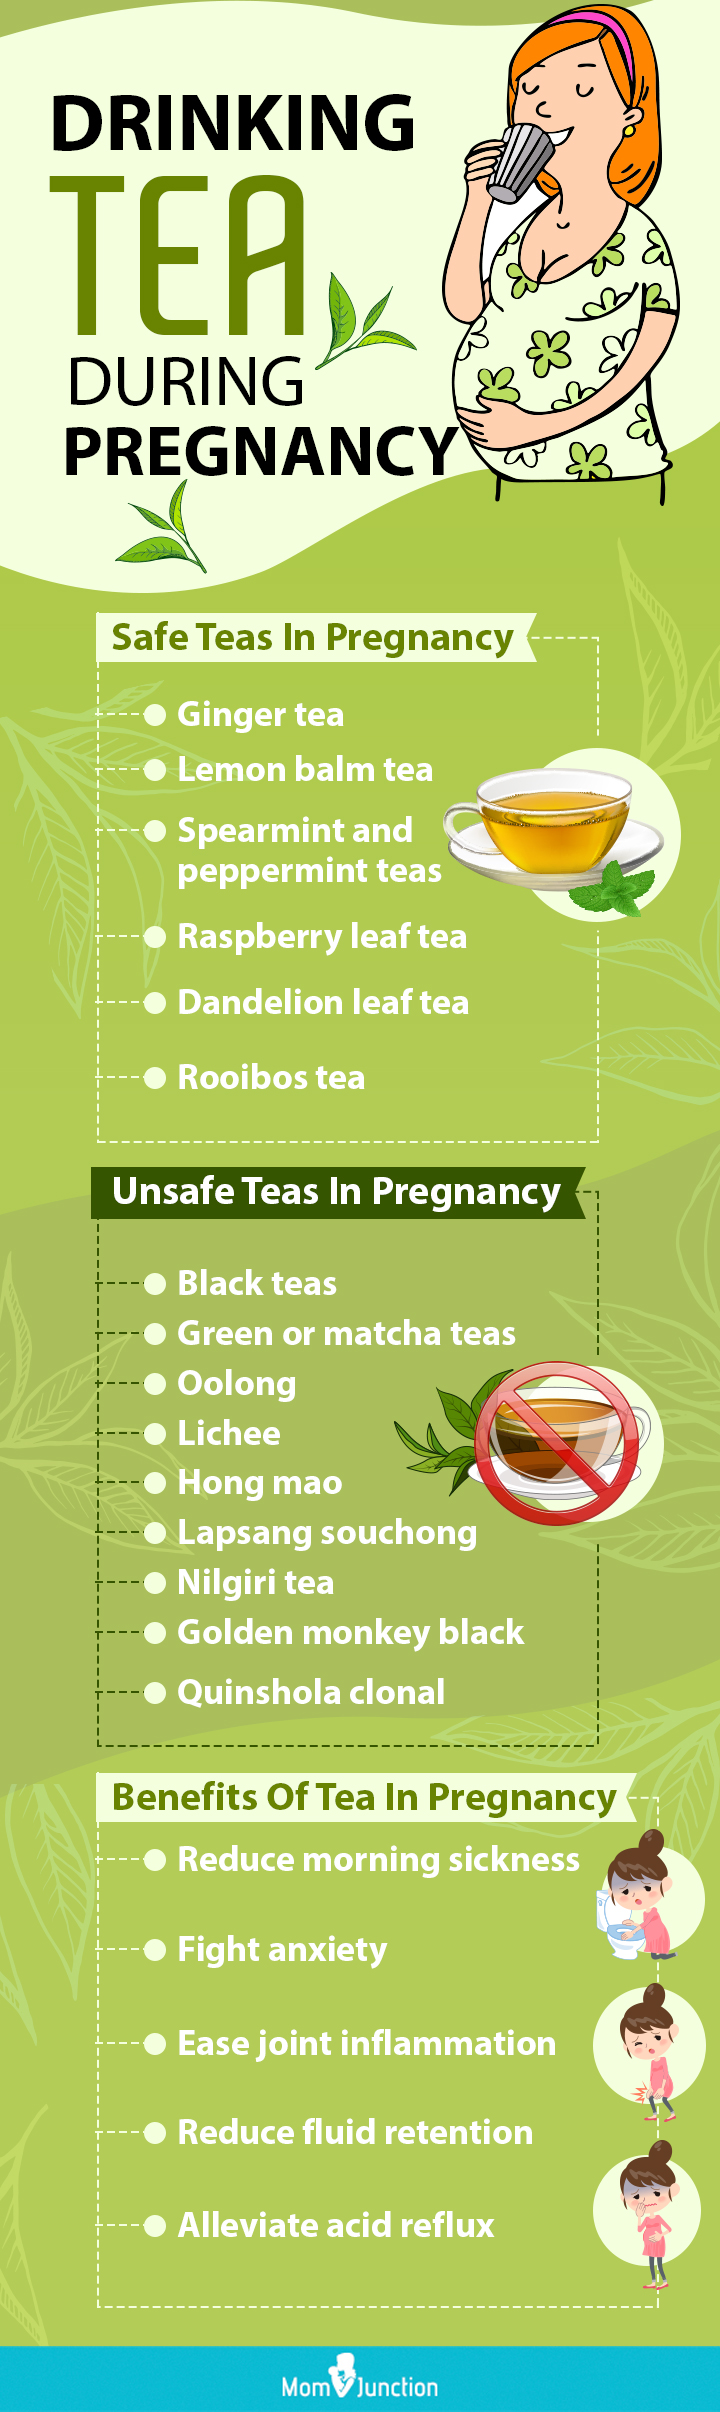 safe unsafe teas during in pregnancy [Infographic]